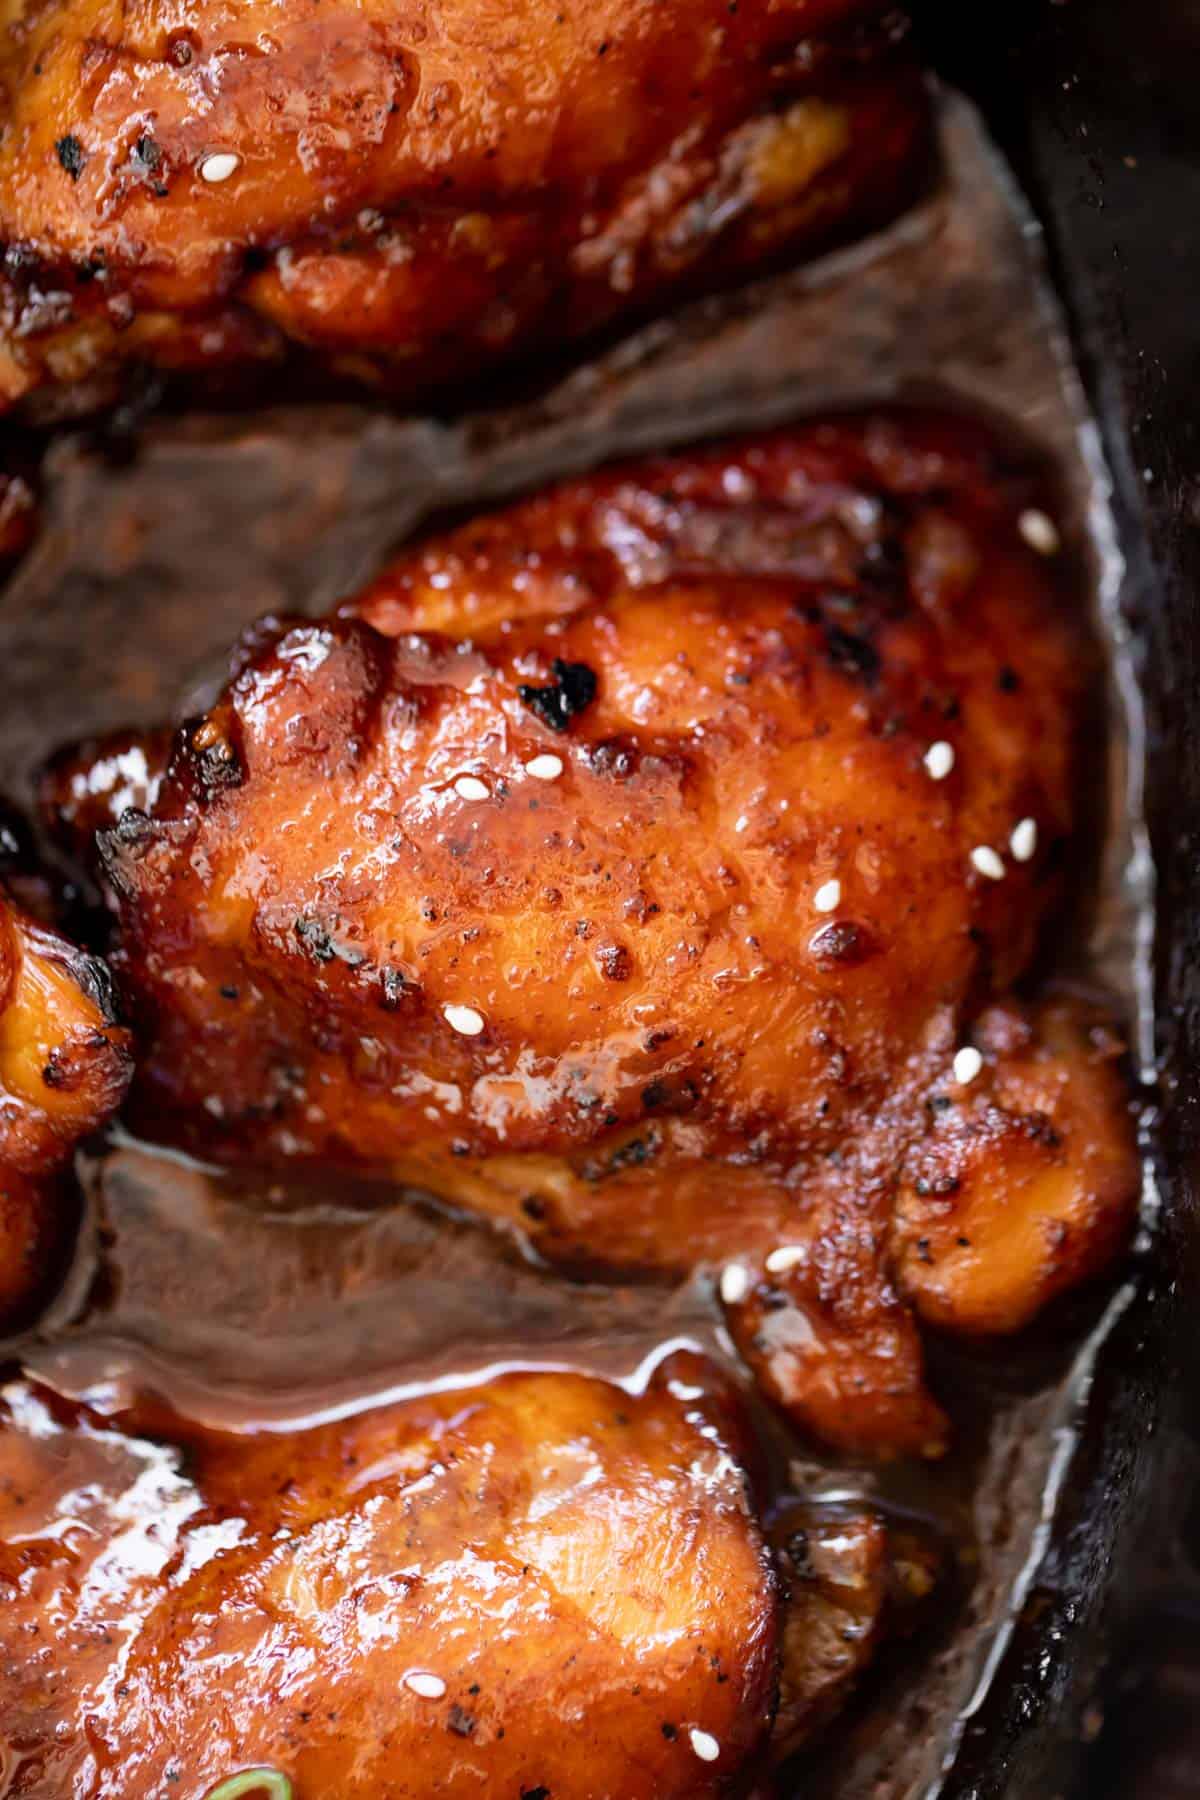 A close-up of a chicken thigh cooked in a honey and garlic sauce.